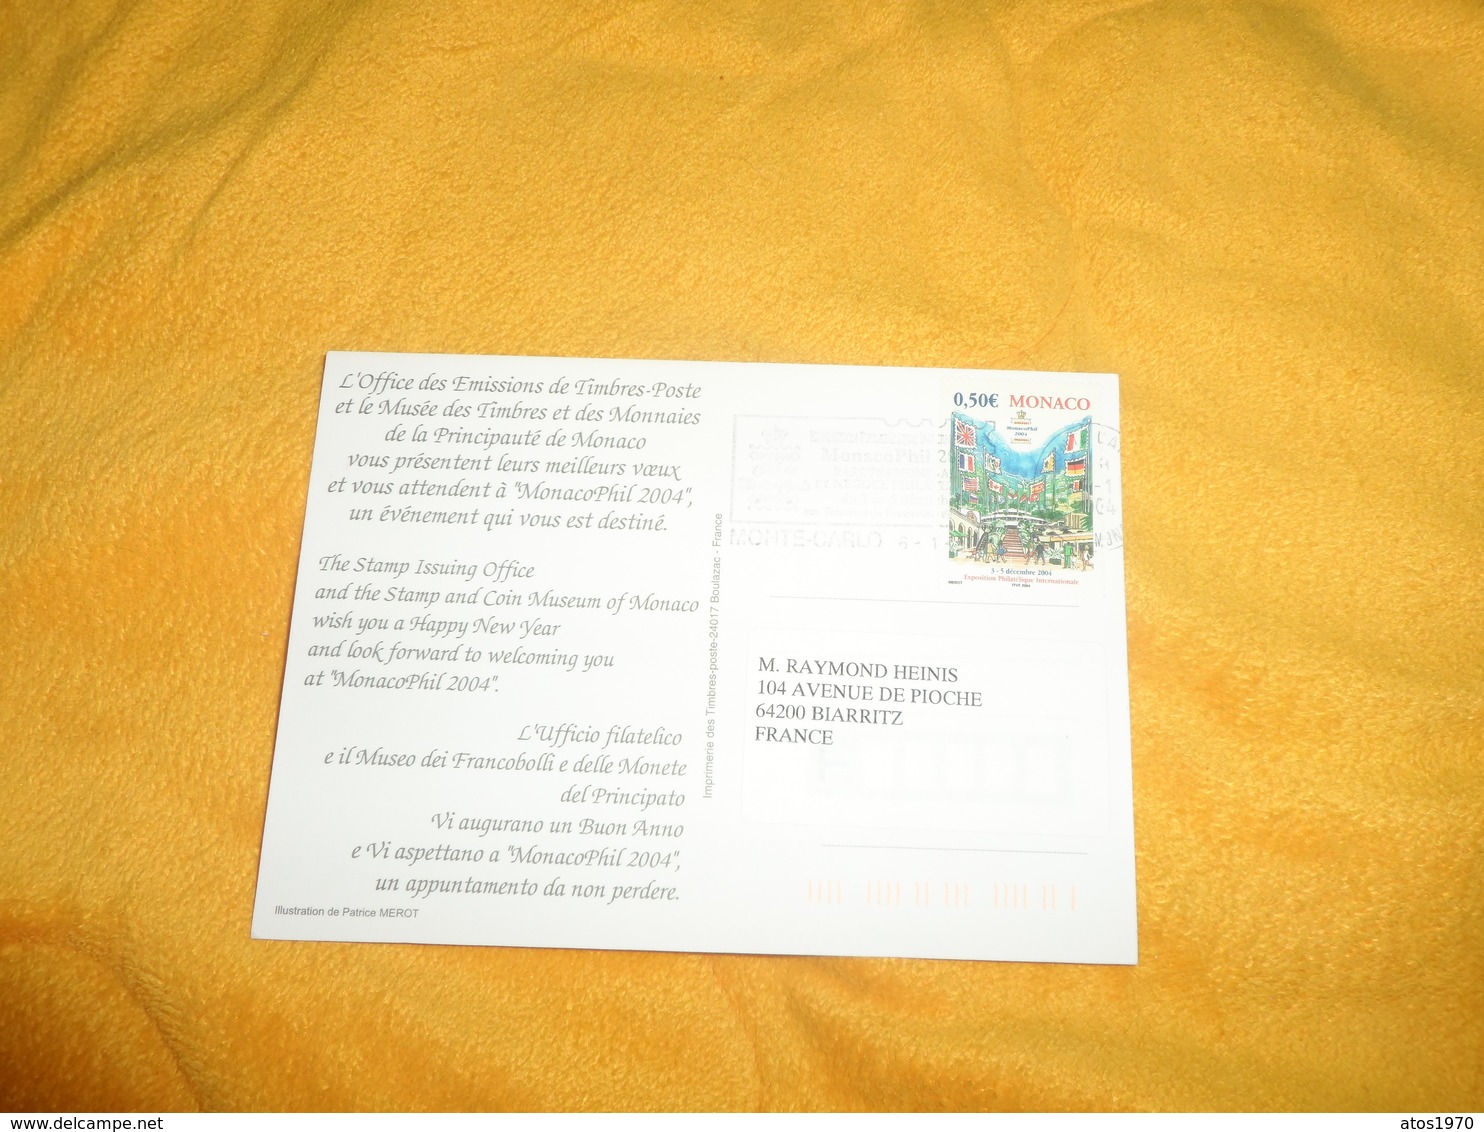 CARTE POSTALE MONACOPHIL 2004. / CACHET + FLAMME + TIMBRE. - Used Stamps